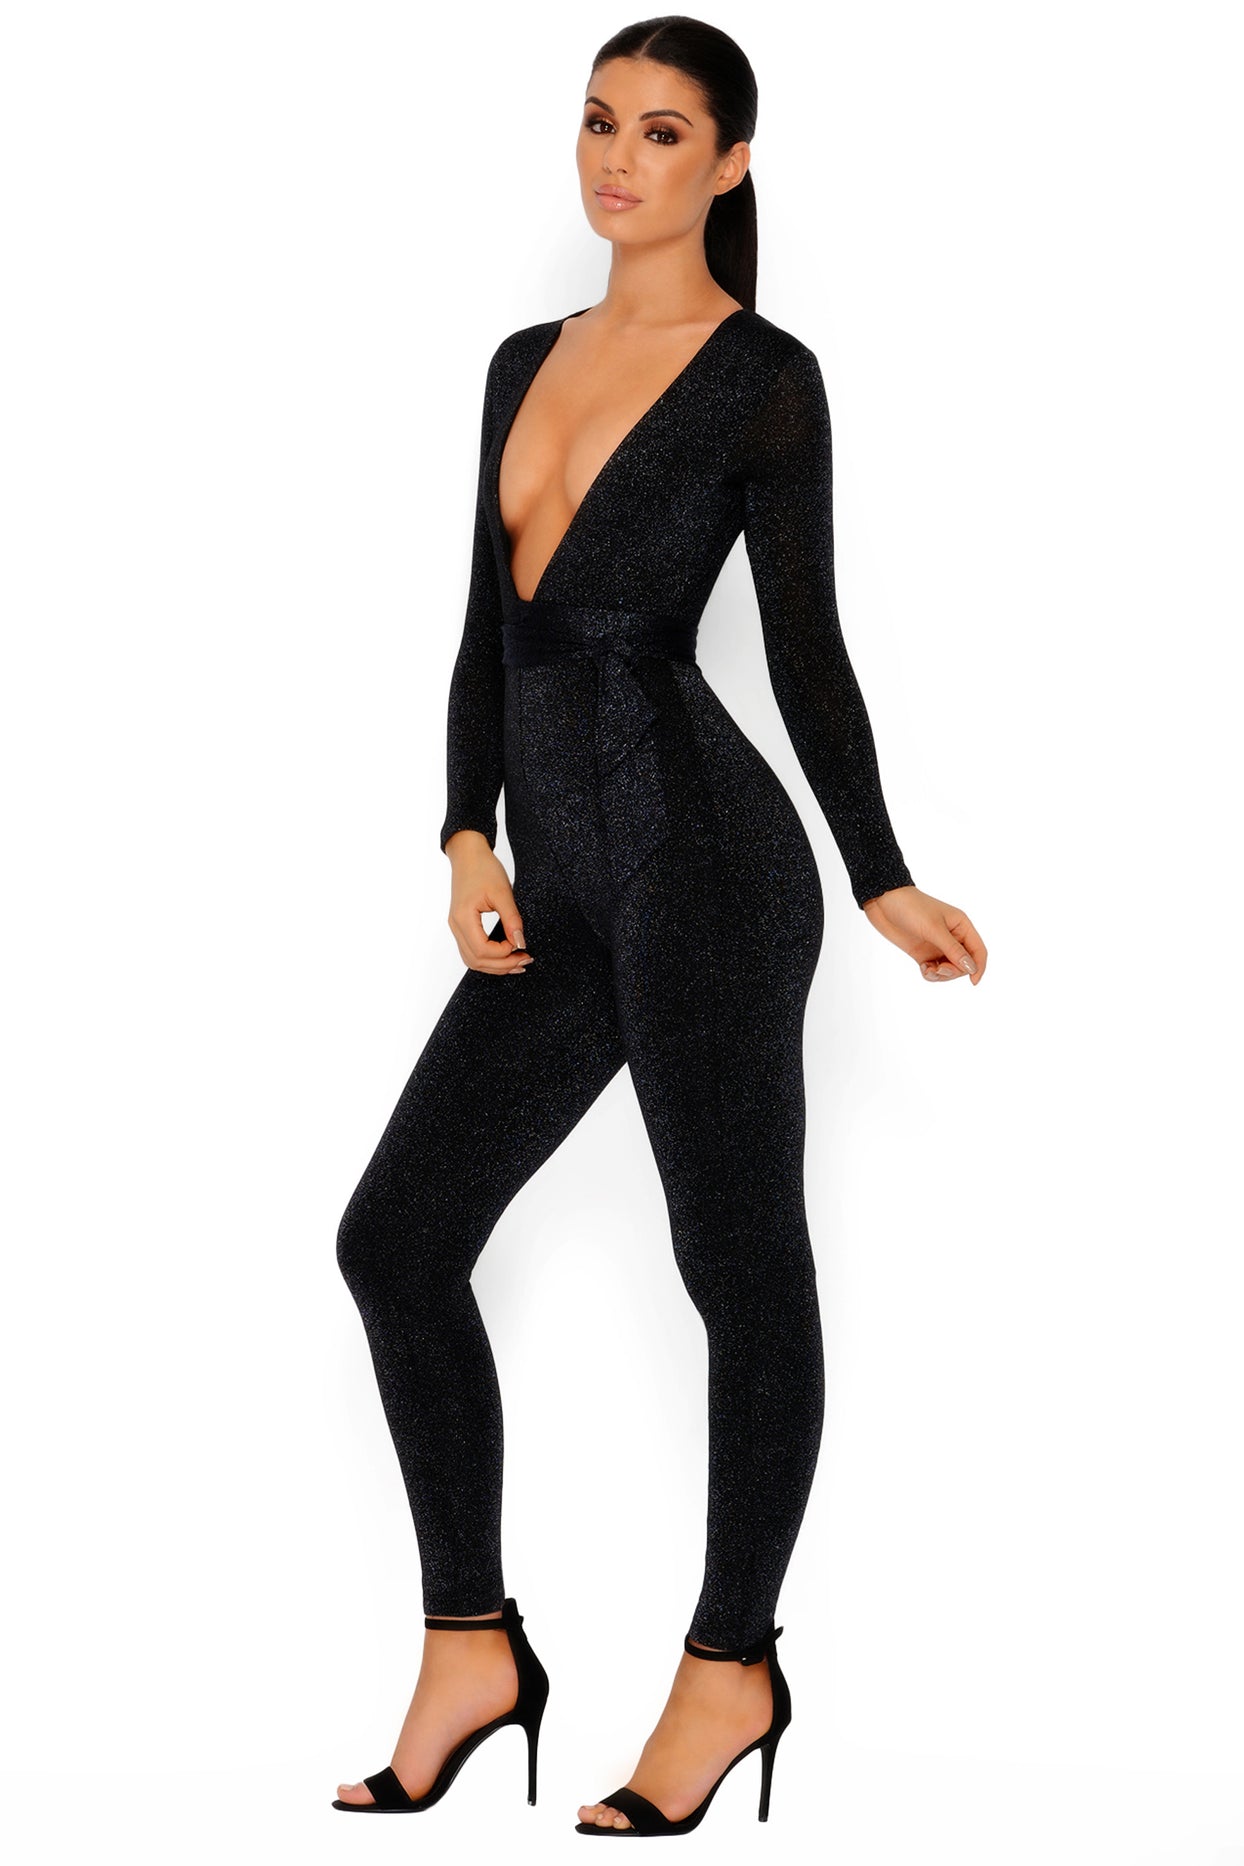 Glisten Closely Metallic Knit Belted Jumpsuit in Black